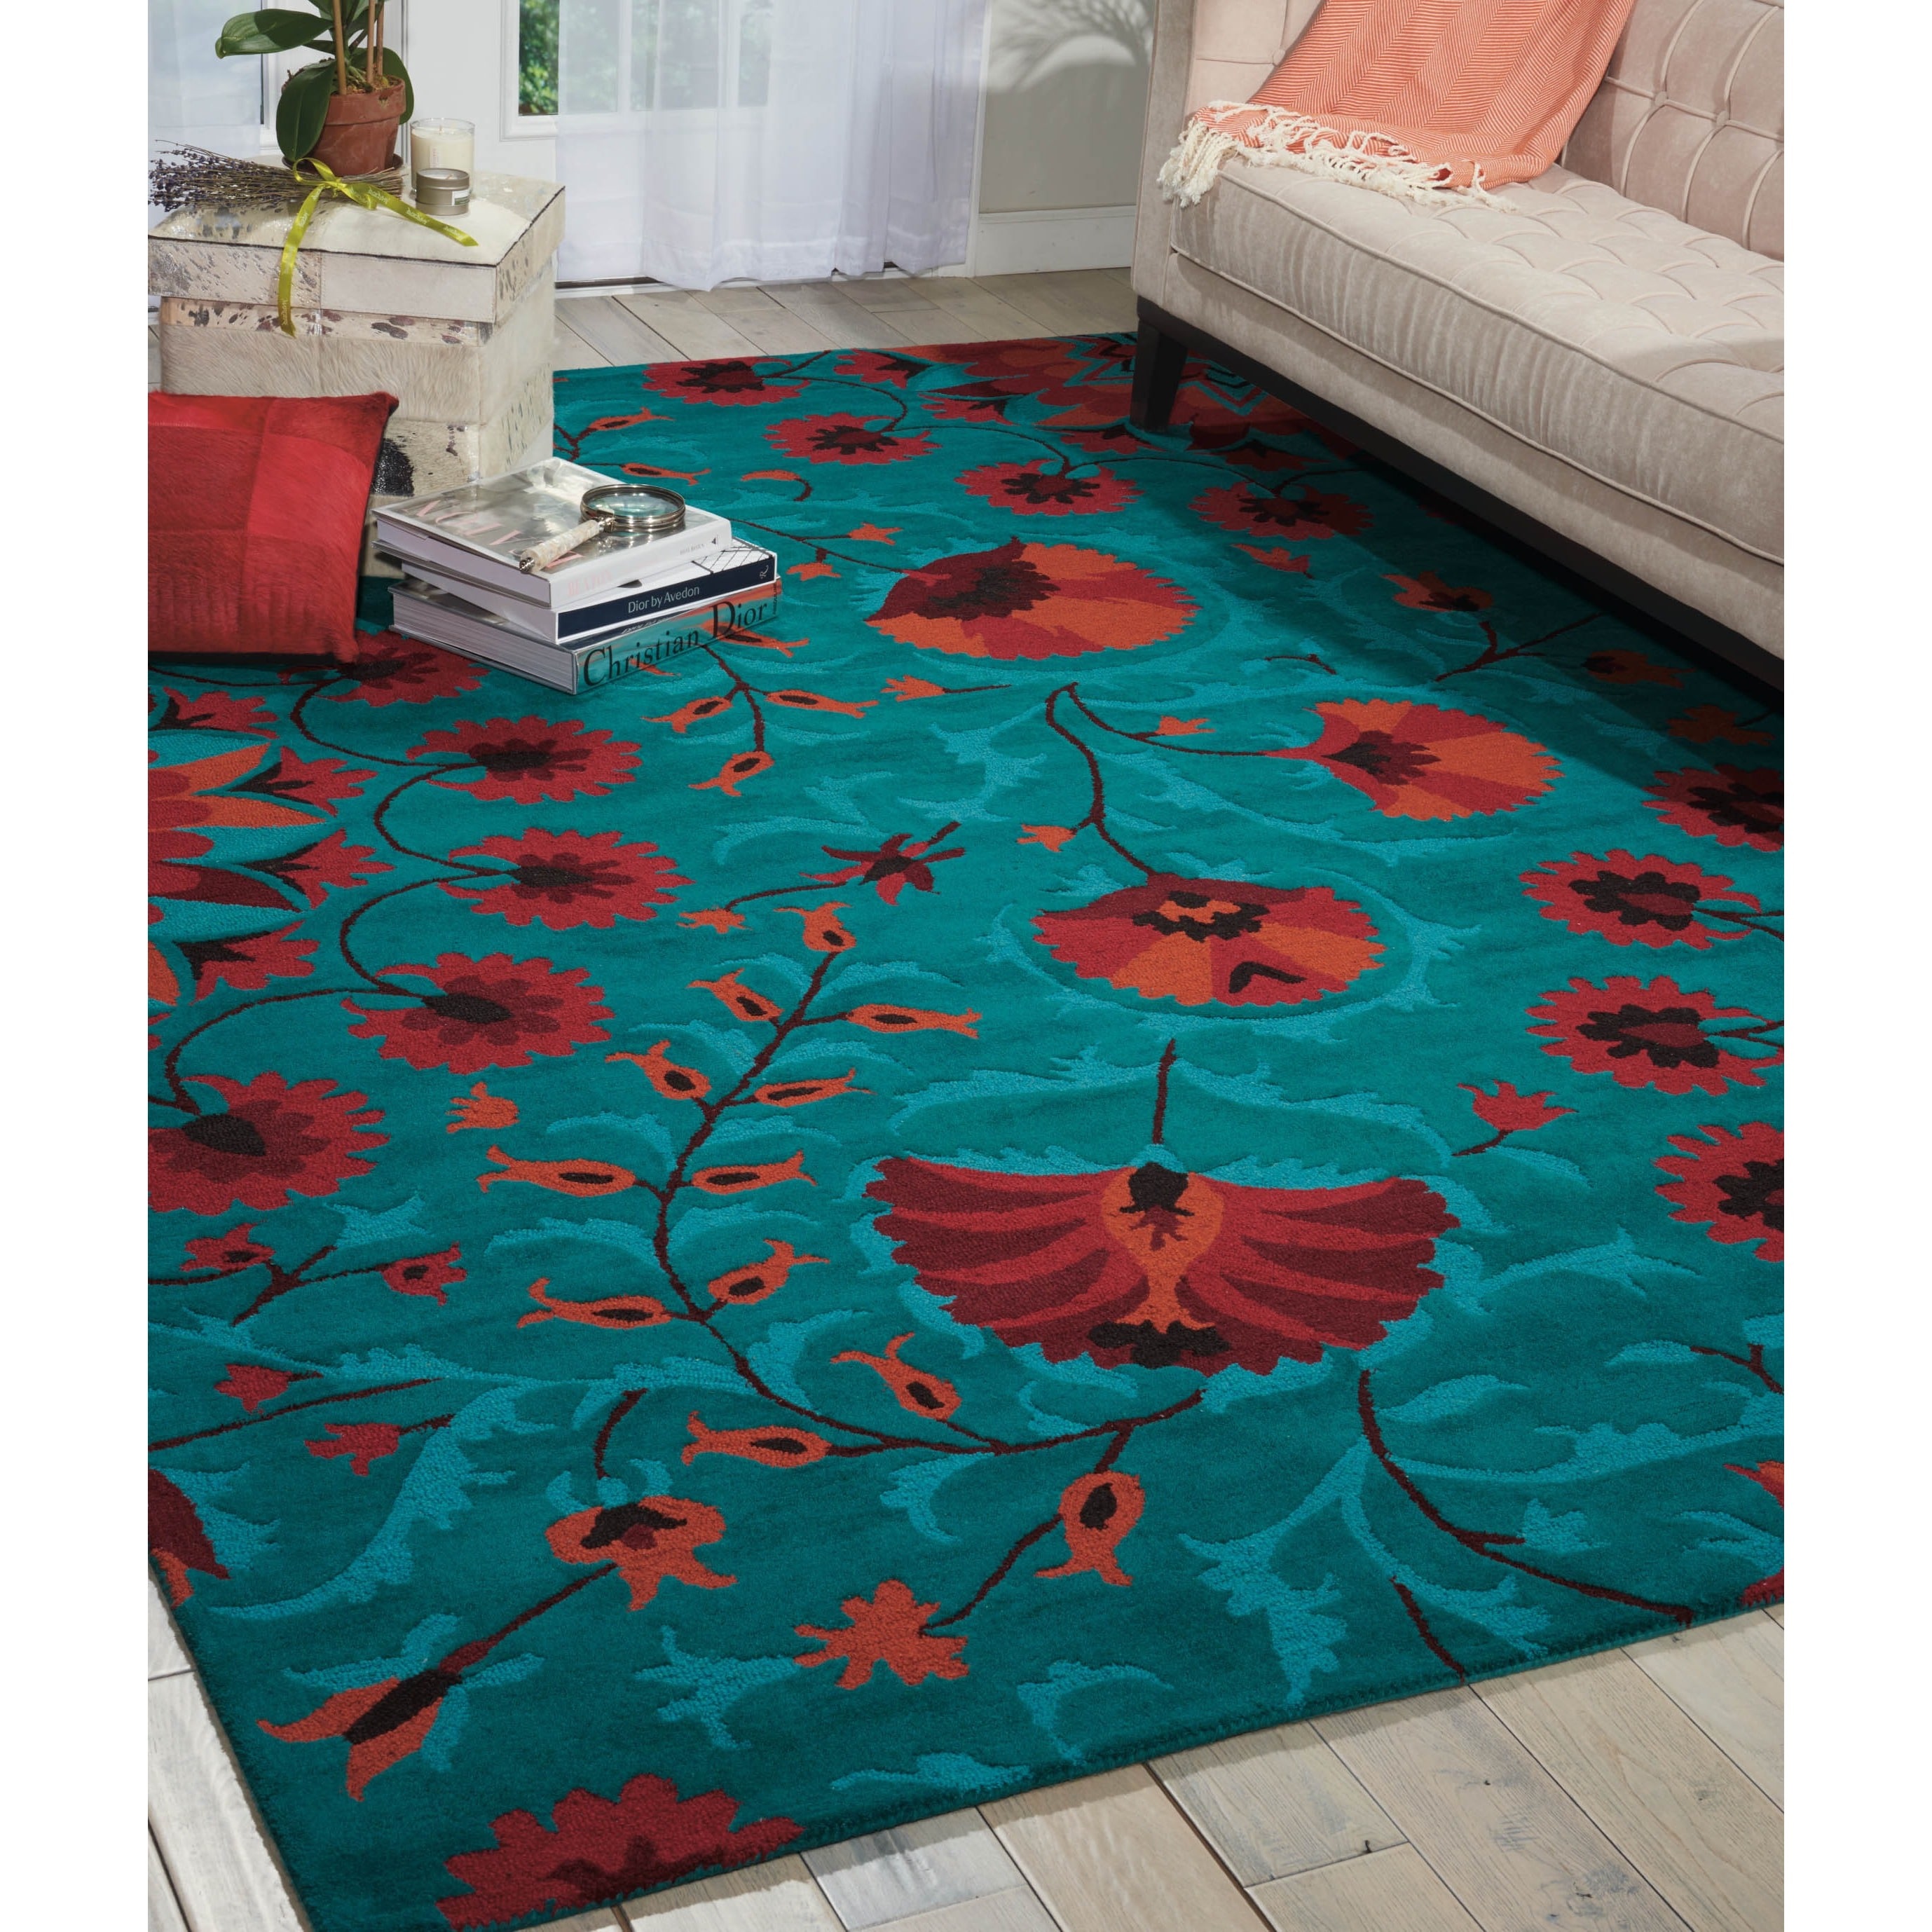 Hand tufted Suzani Teal Floral Bloom Rug (53 X 75)